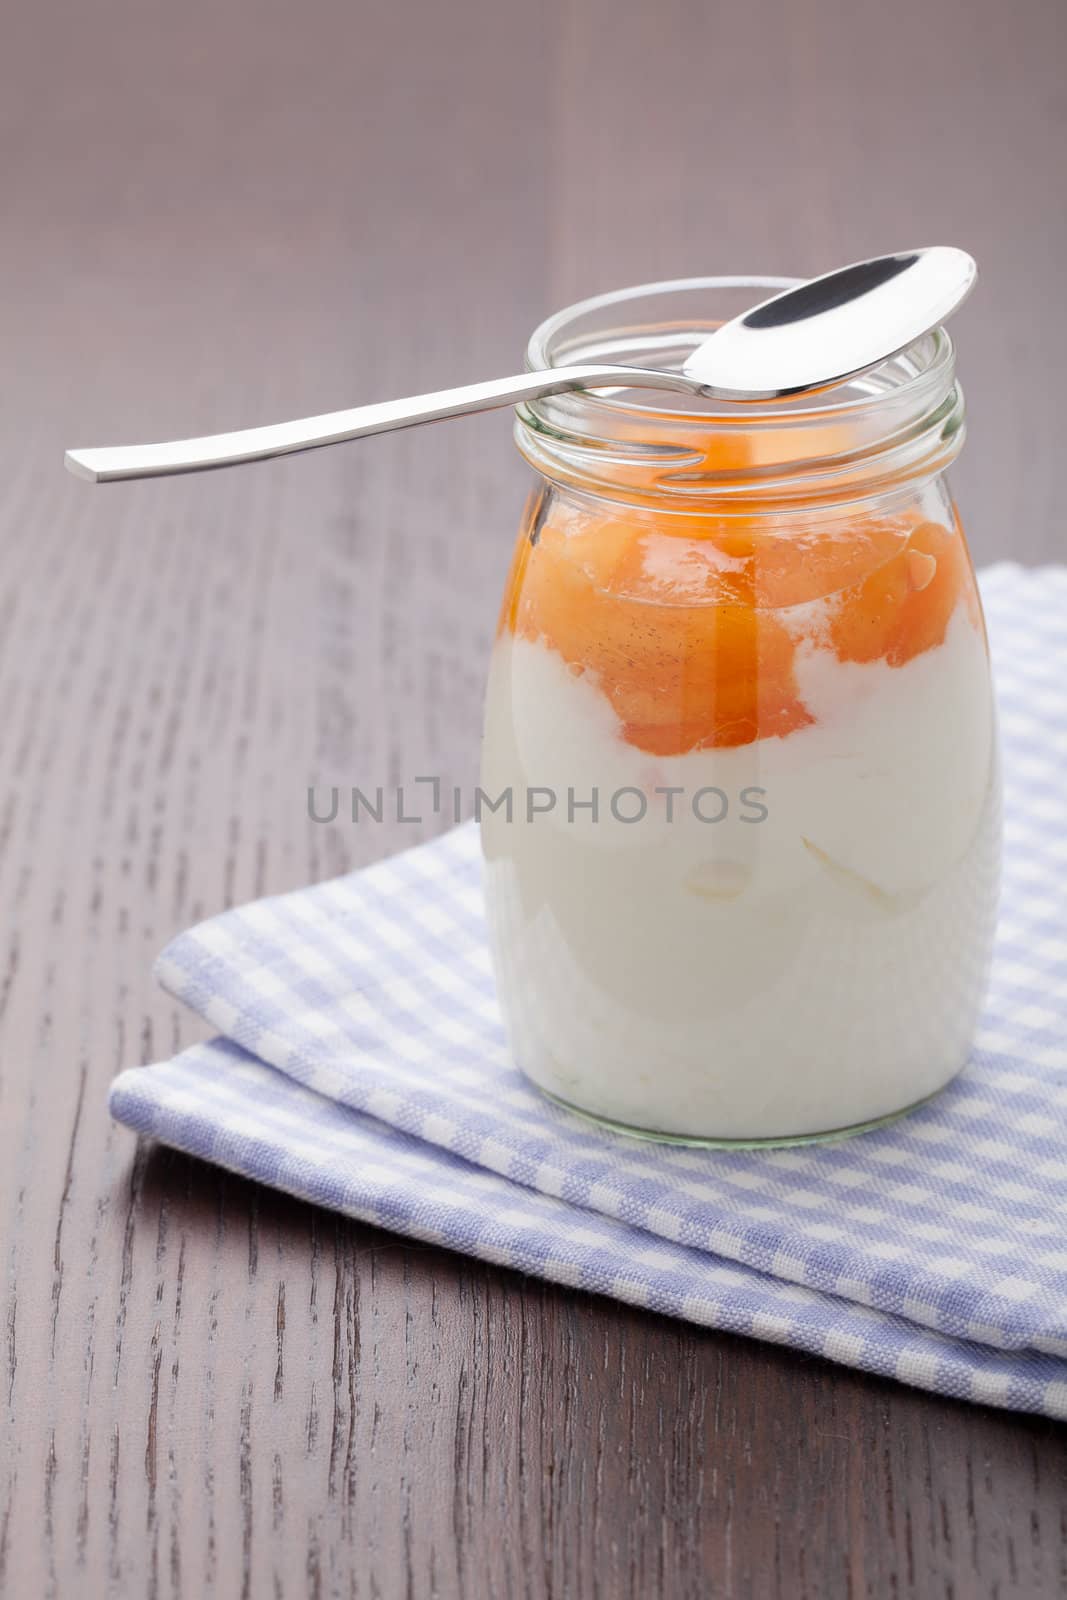 Homemade milk yogurt with peach or apricot jam in glass pot and metal spoon served on linen napkin, wooden table